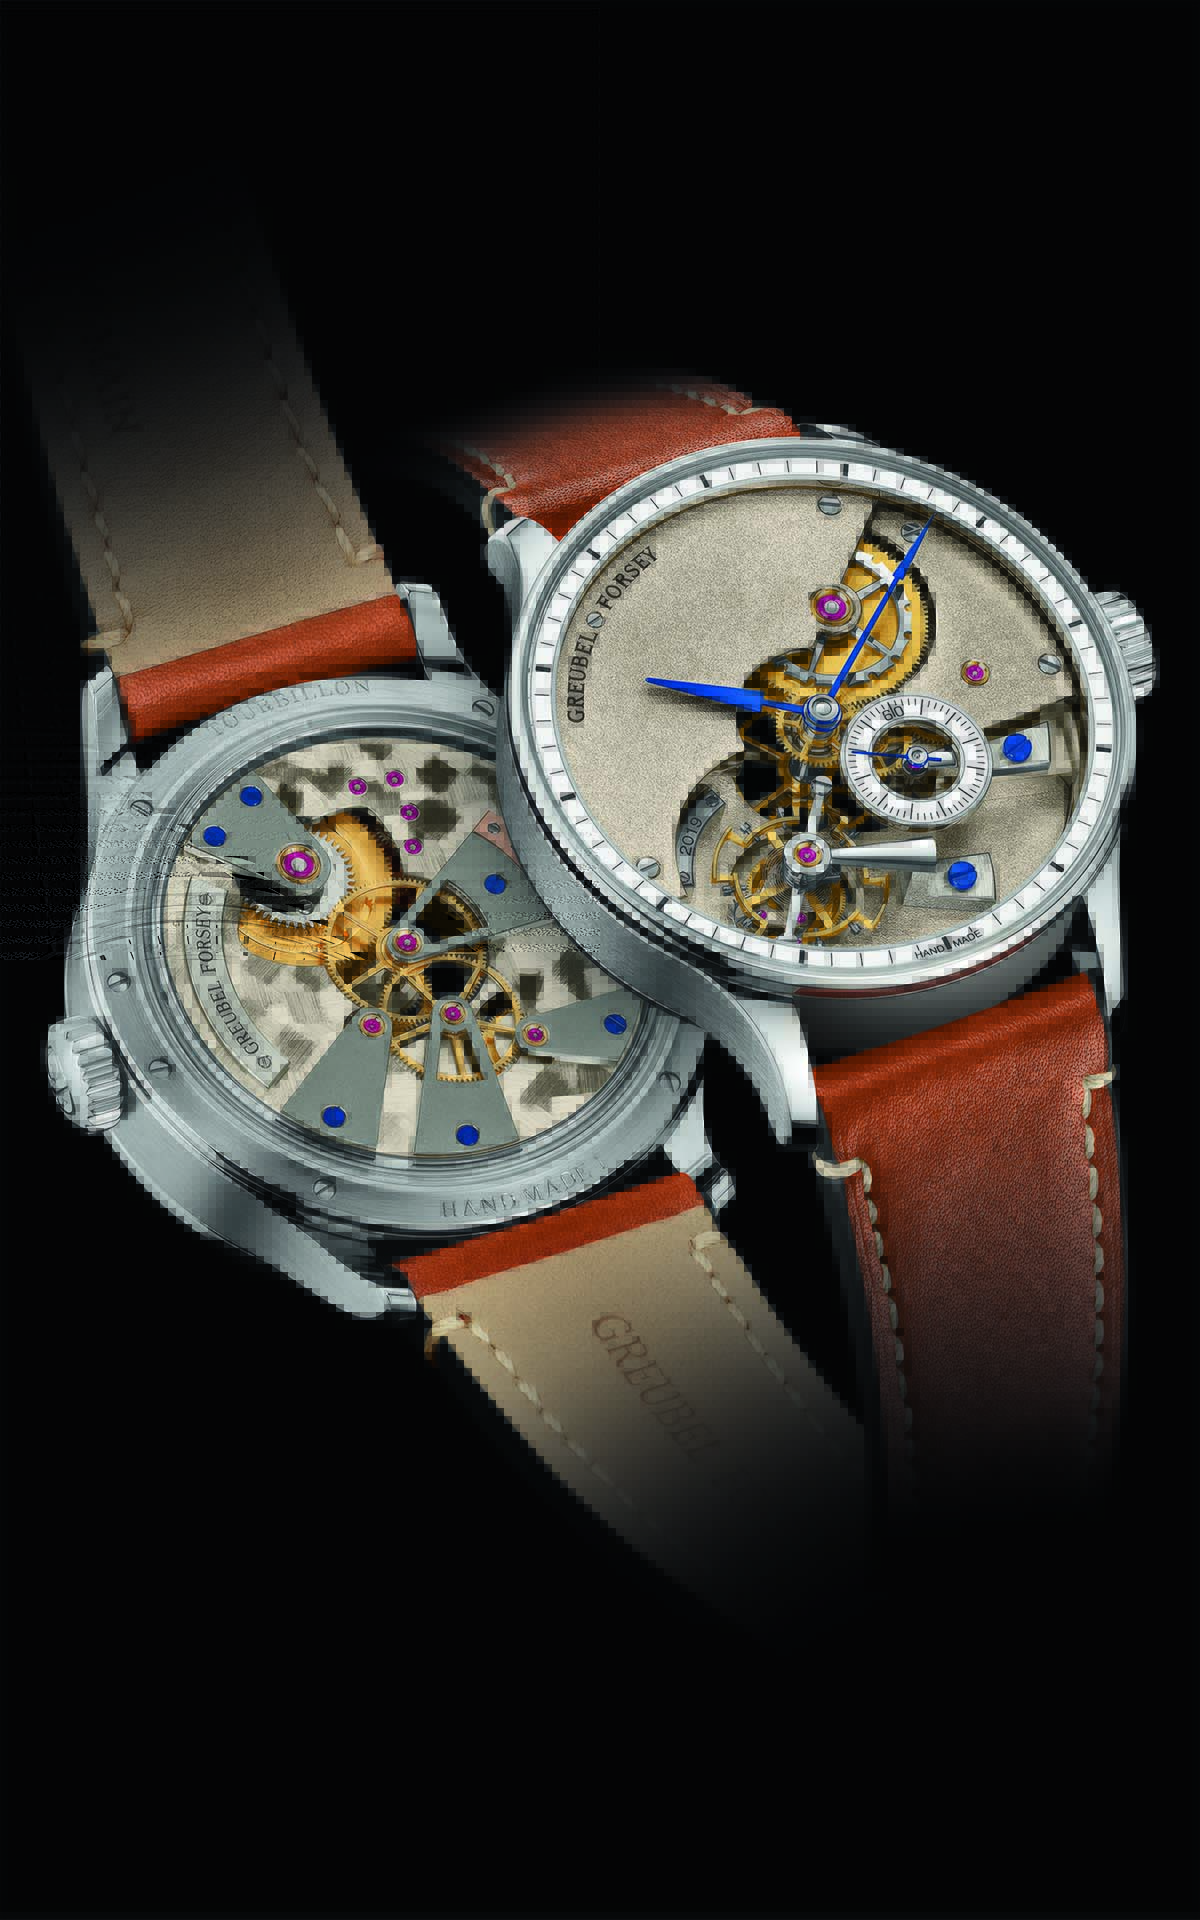 Greubel Forsey Hand Made 1 frente y trasera fx